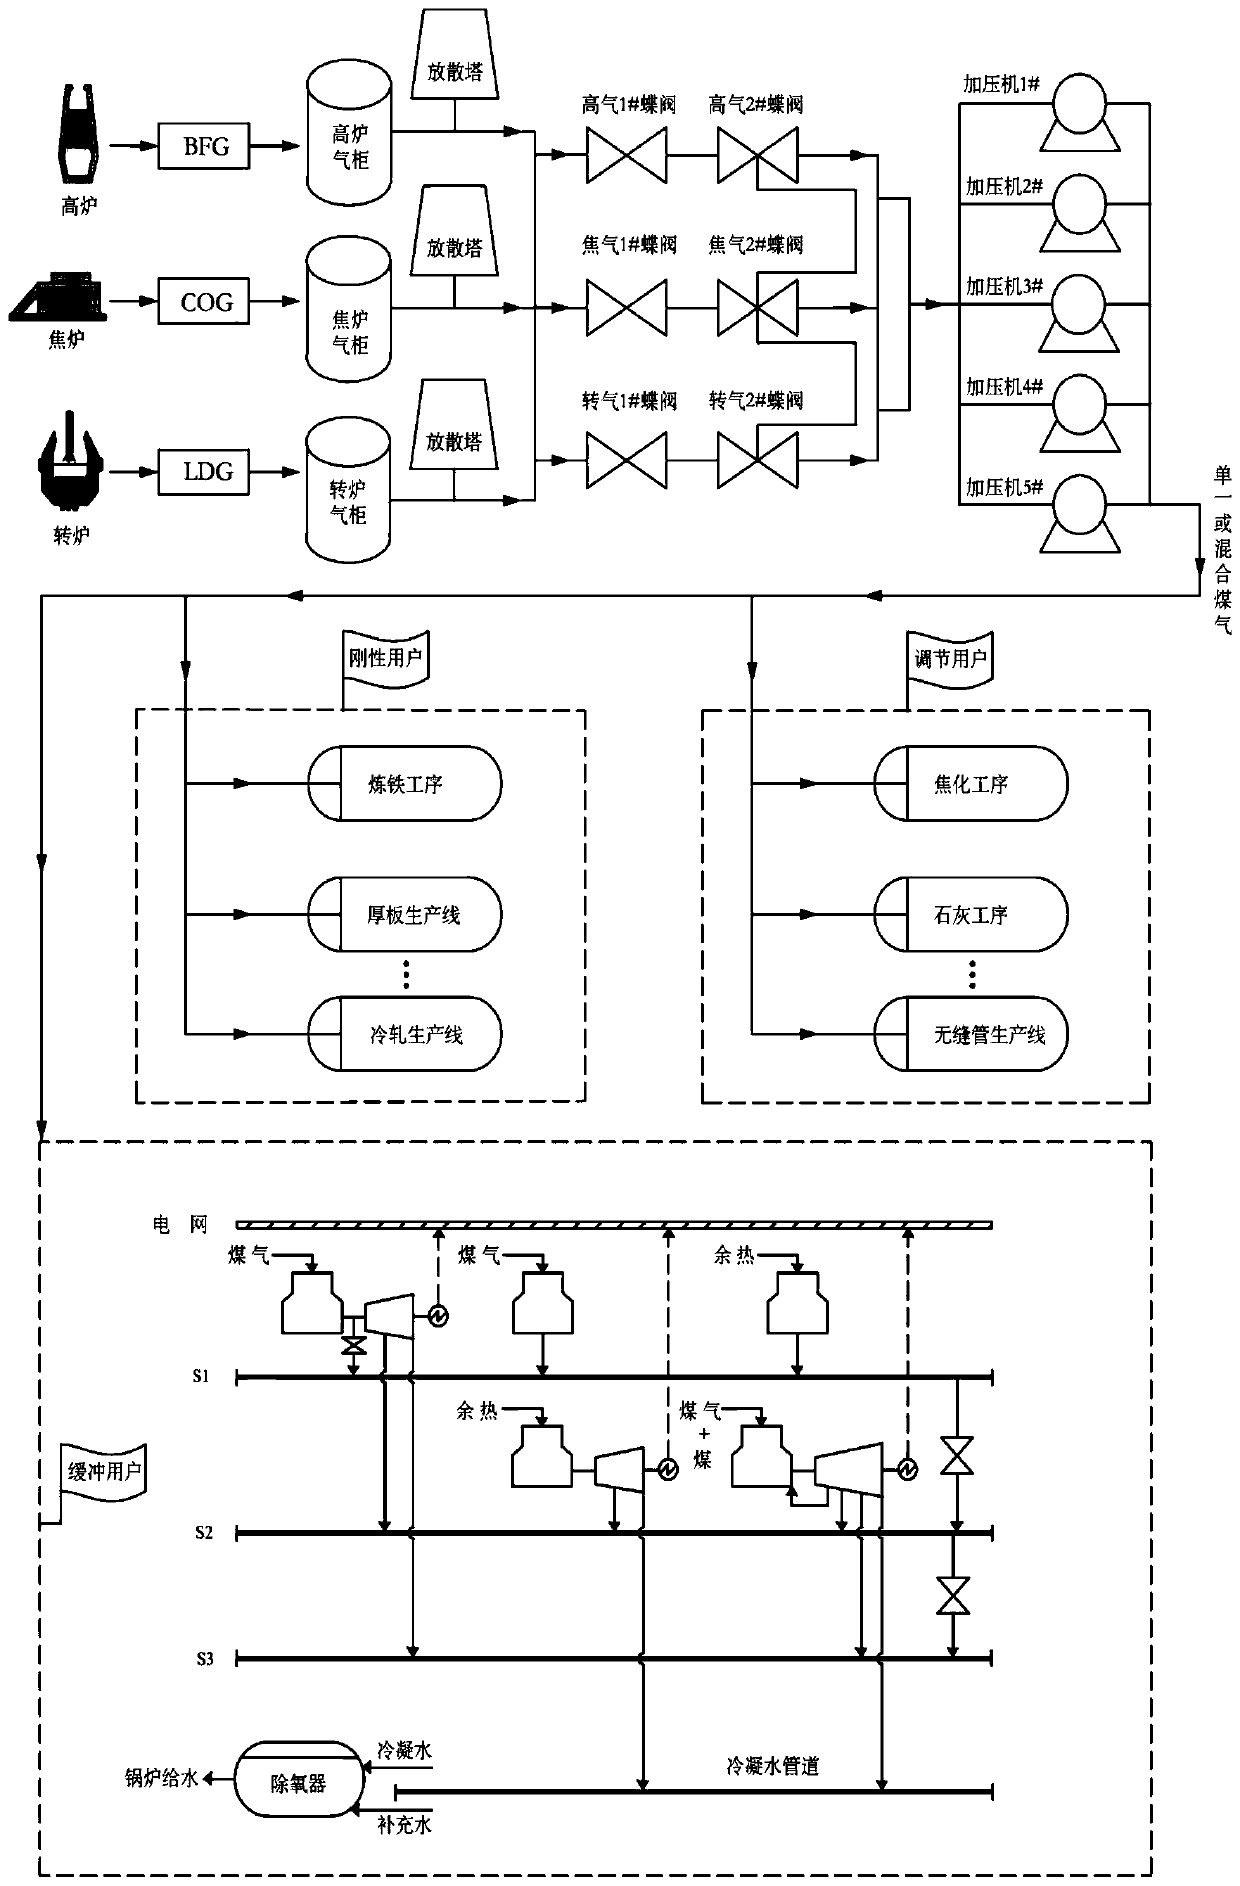 A Multi-objective Optimal Scheduling Method Based on Iron and Steel Enterprise Energy System